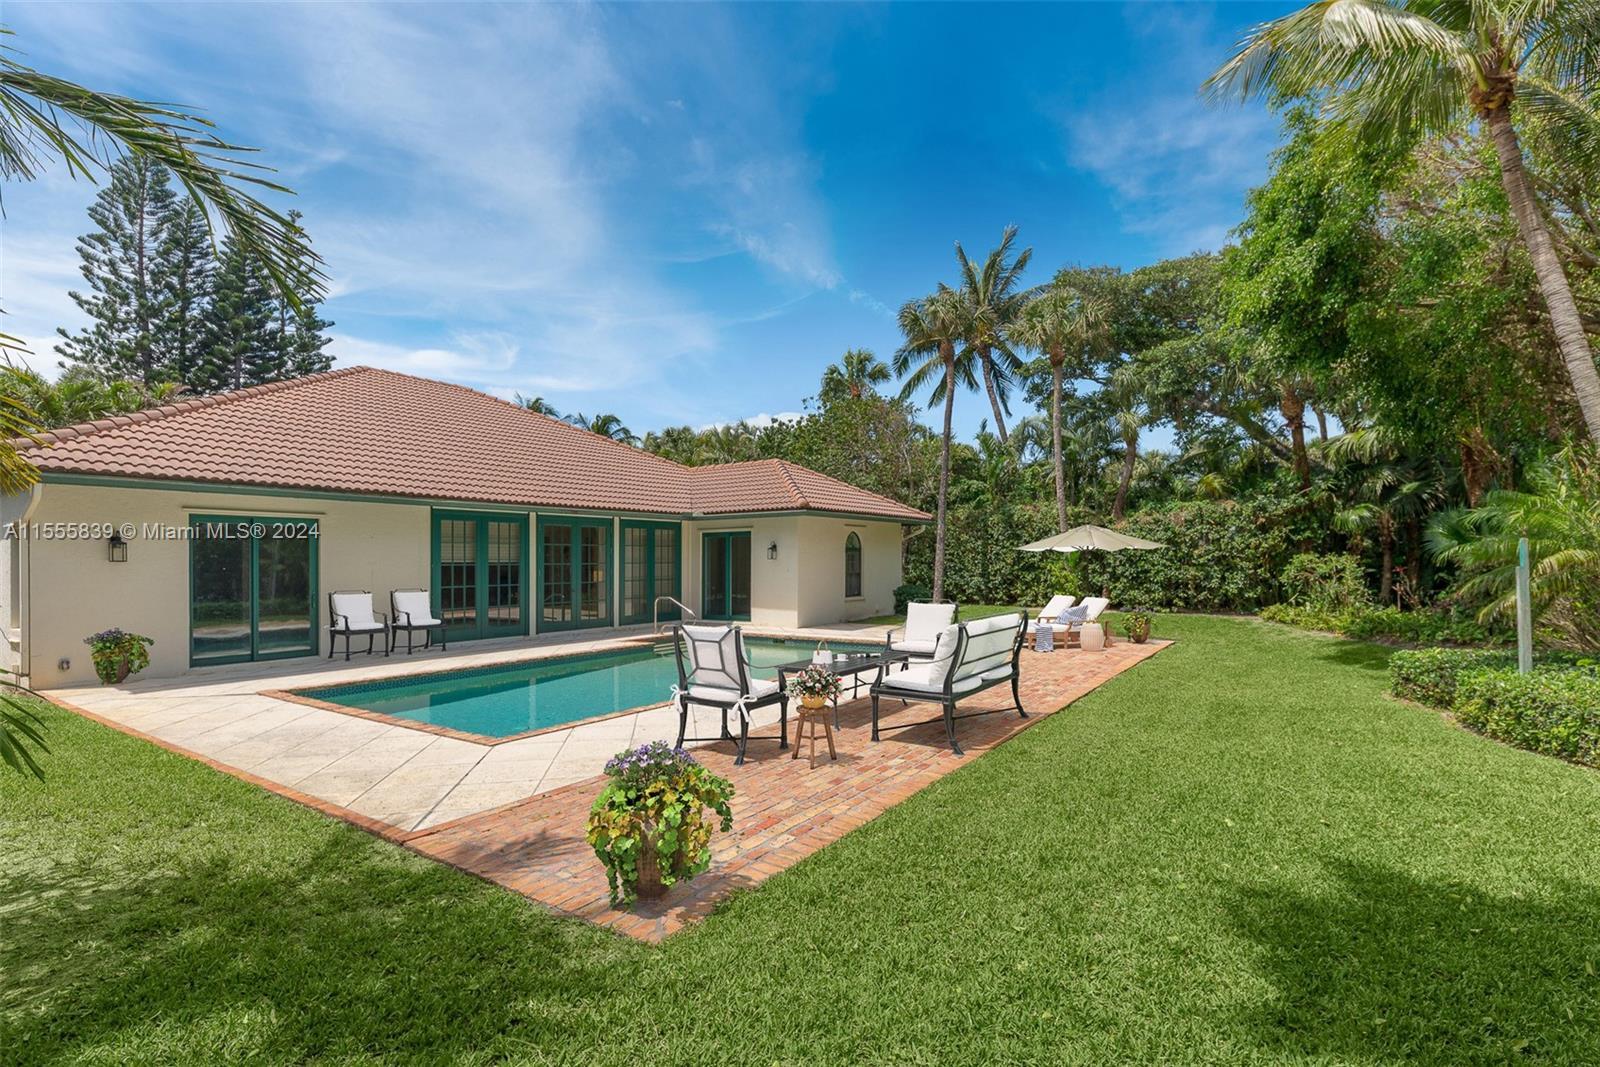 Situated on Jupiter Island, this charming property offers an inviting atmosphere. This CBS home Feat